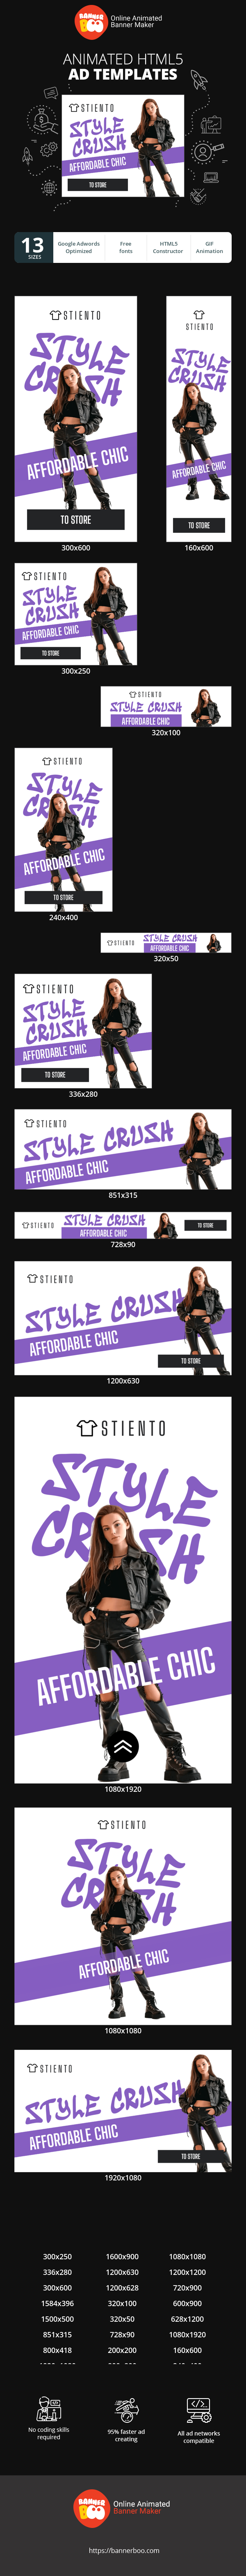 Banner ad template — Style Crush Affordable Chic — Fashion Sale